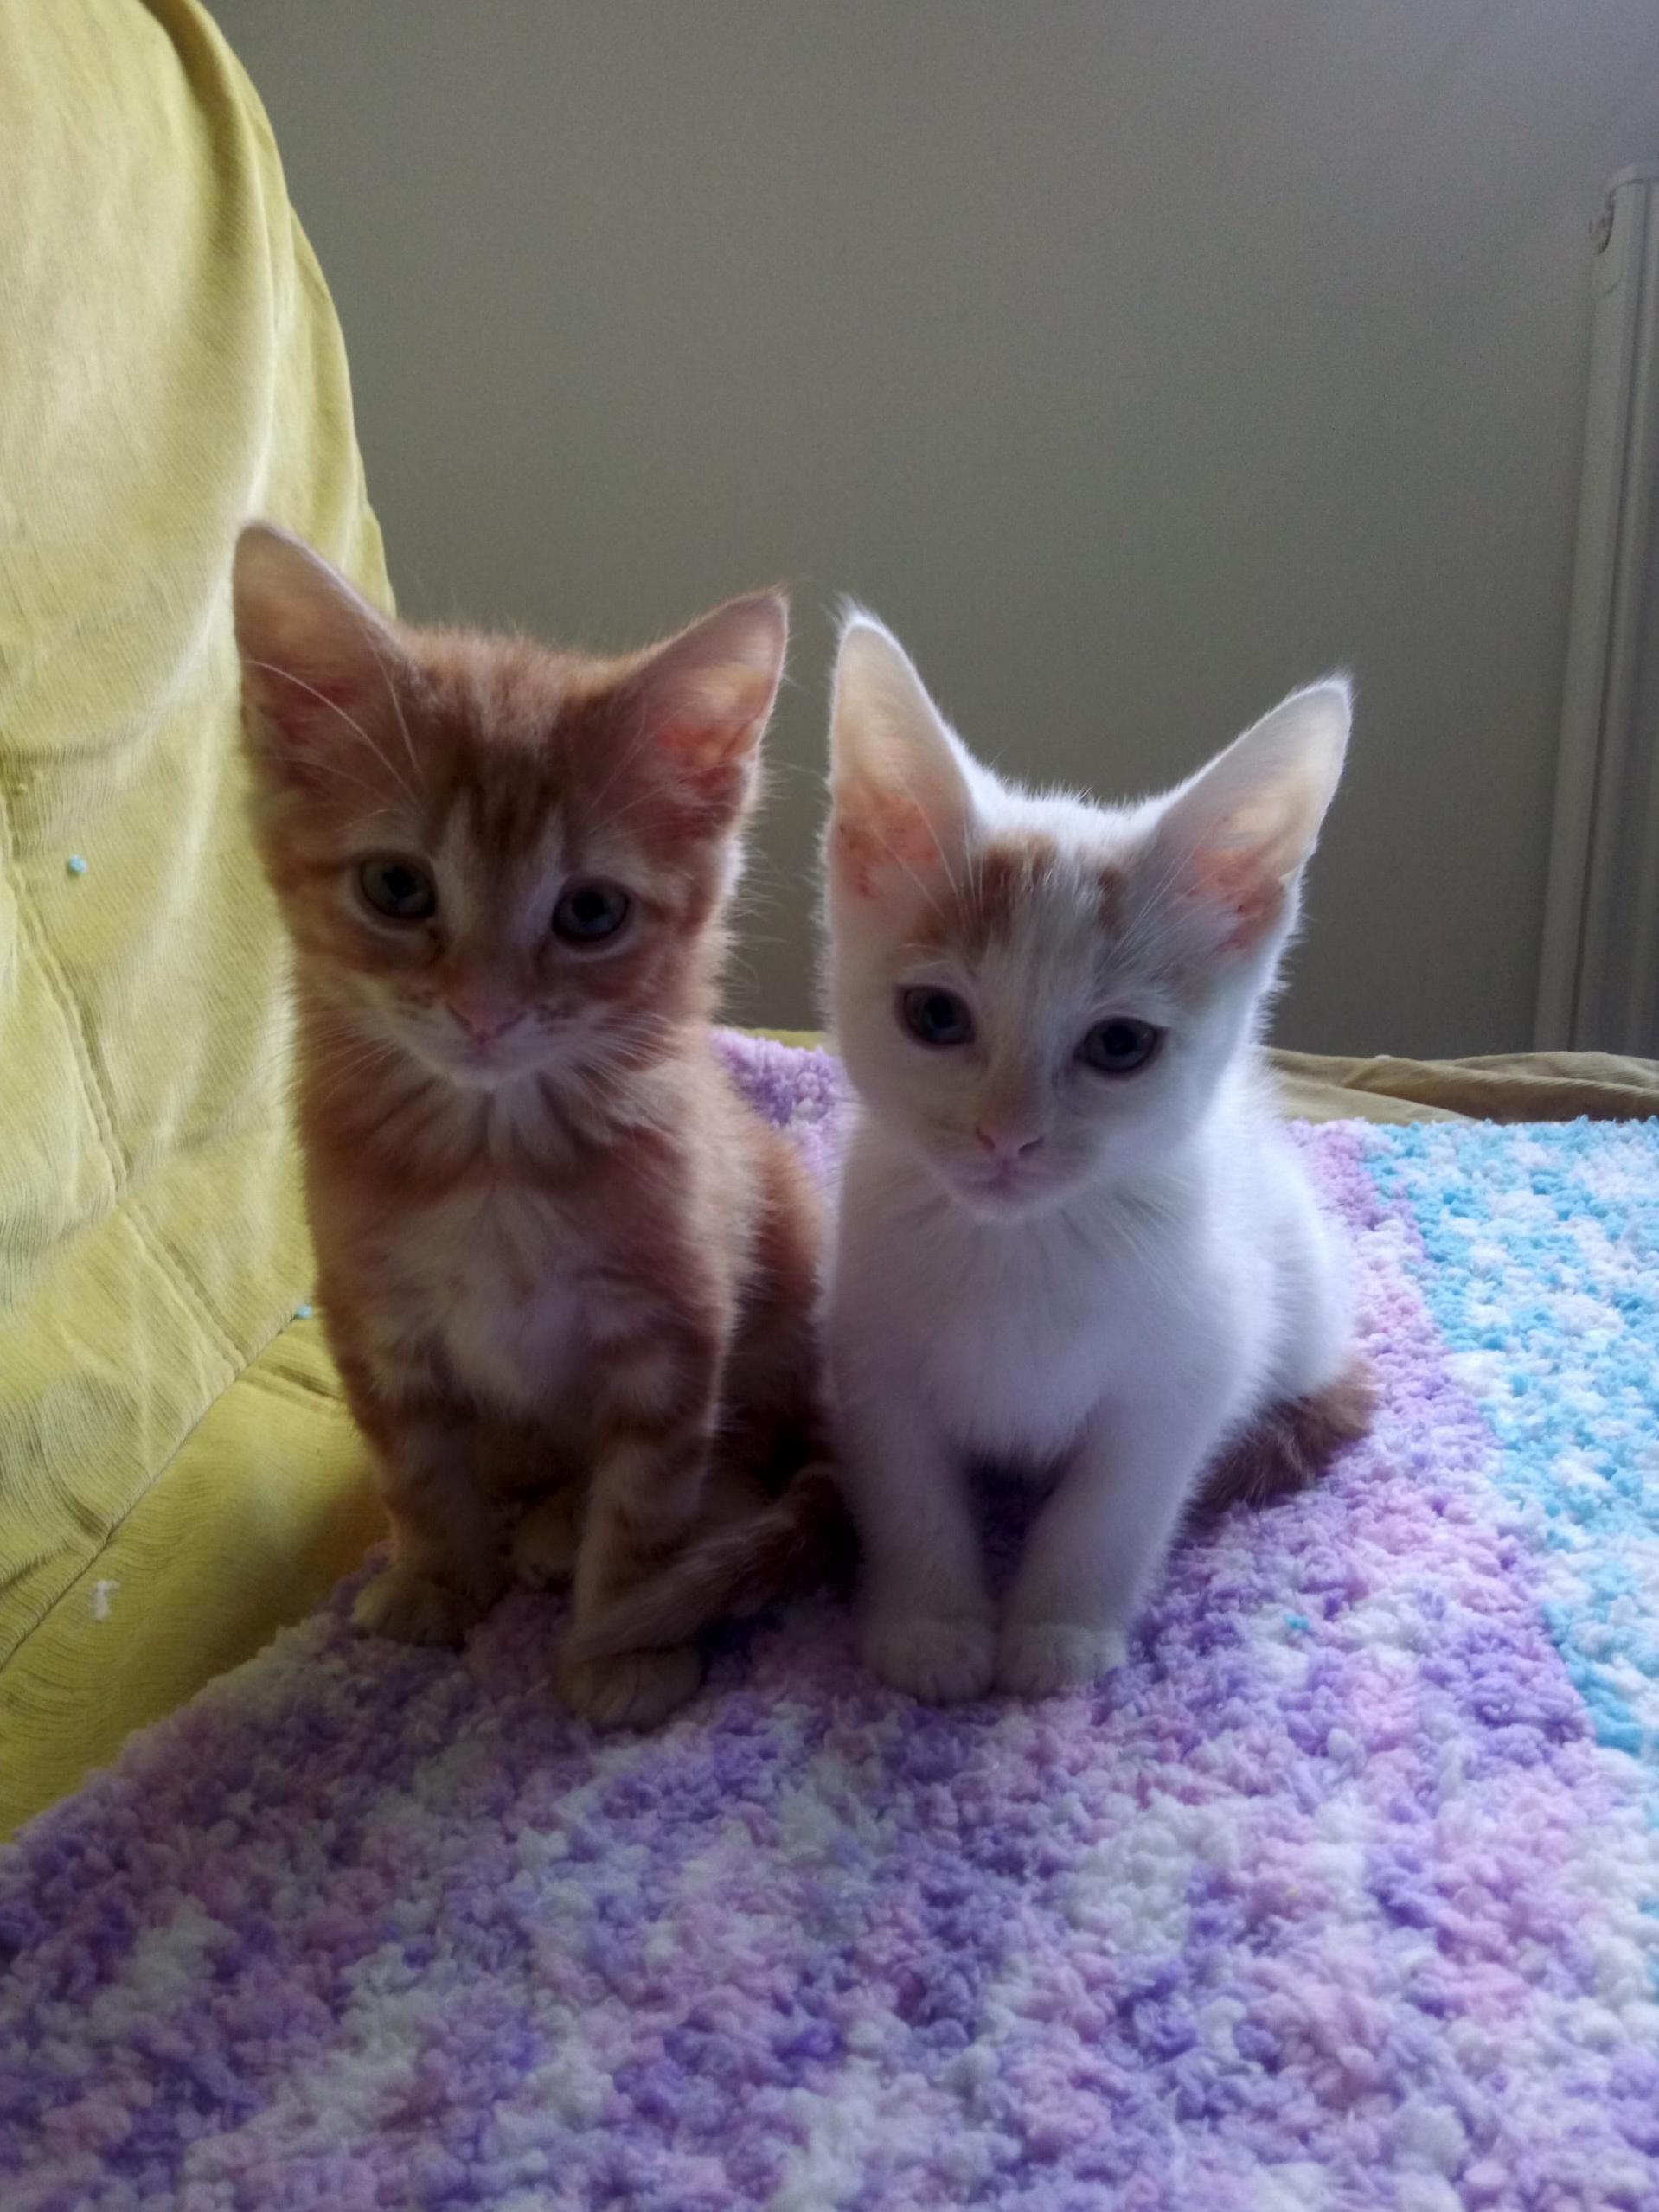 Meet vyvyan and rik adopted last weekend from bradford cat rescue uk. welcome to your forever home little floofs x